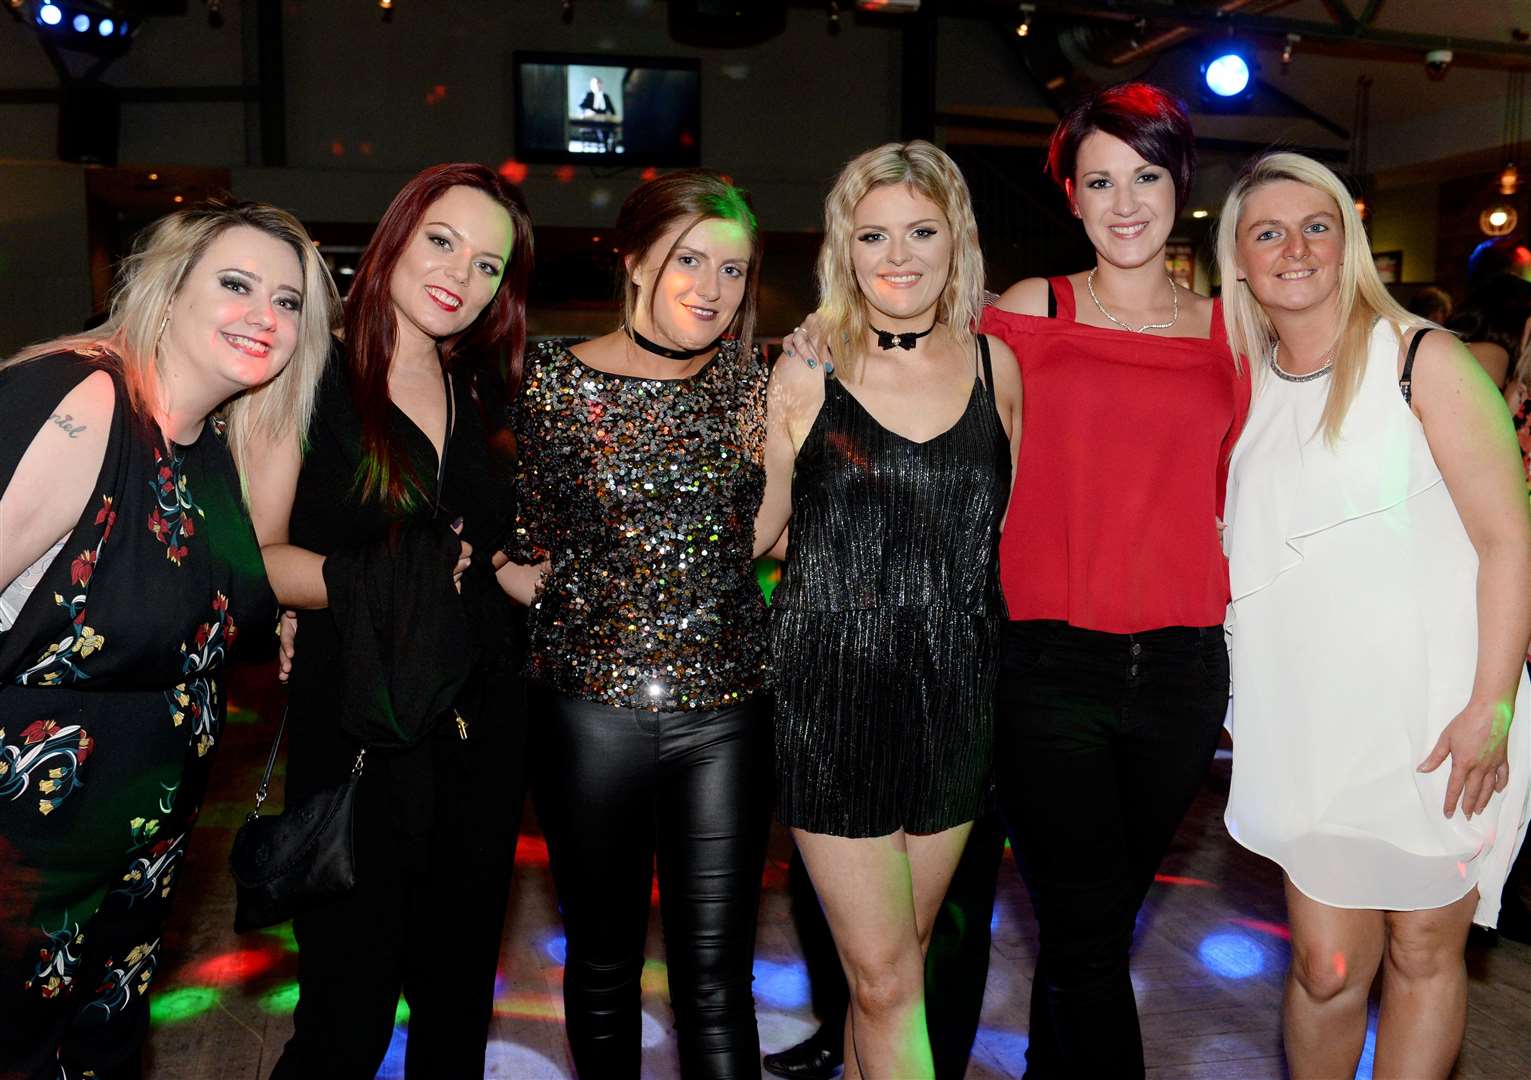 Jade Buchanan(3rd right) parties on her 28th birthday at Auctioneers.